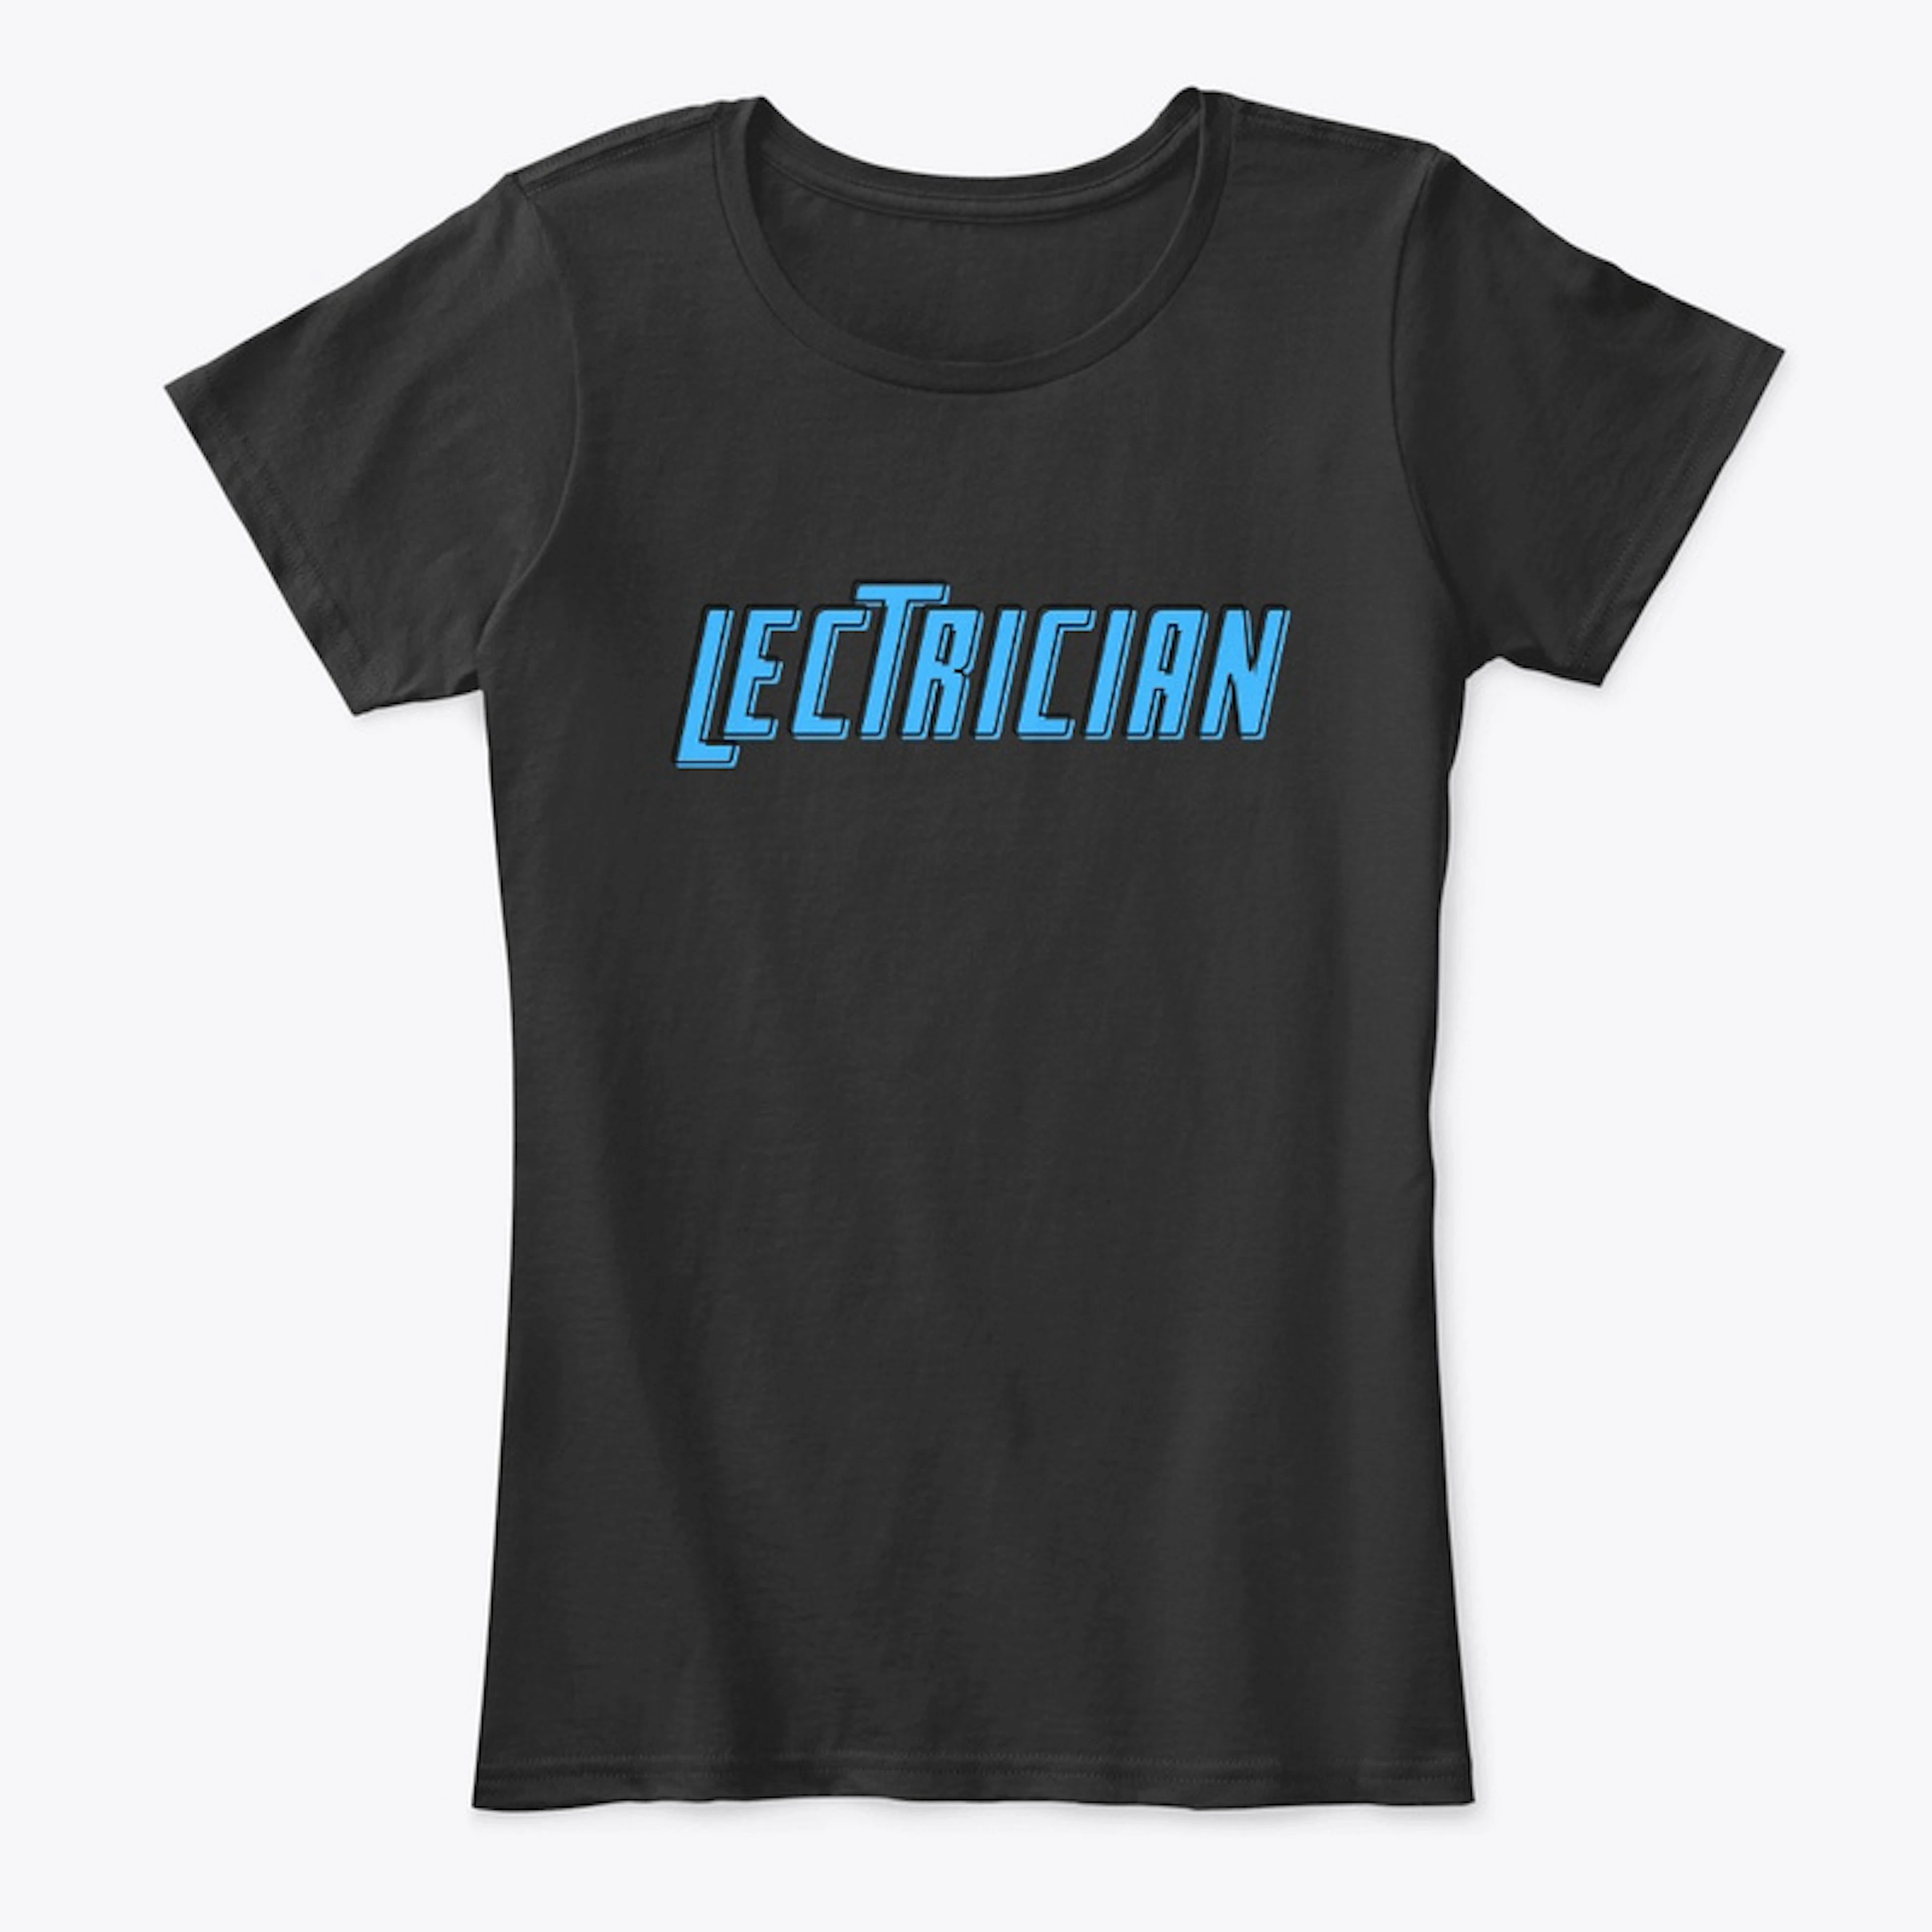 Lectrician